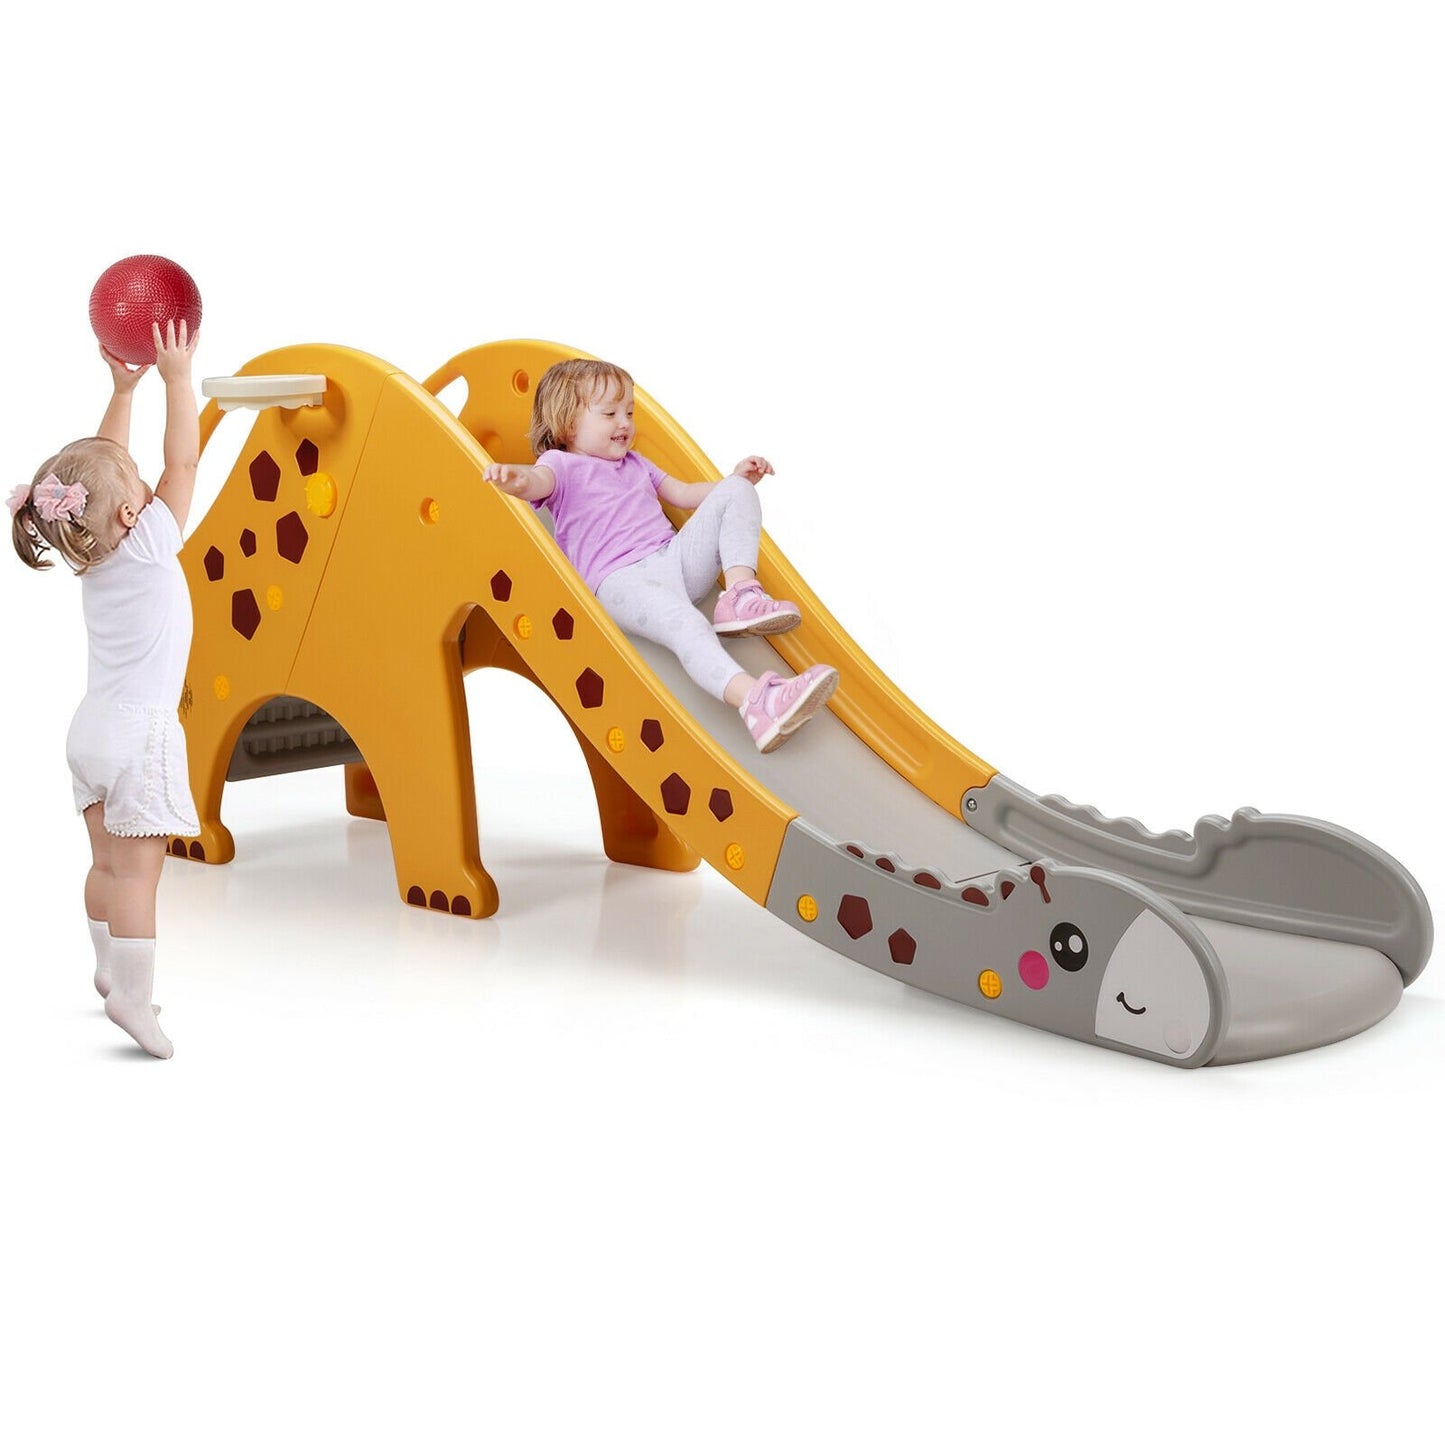 3-in-1 Kids Climber Slide Play Set with Basketball Hoop, Yellow at Gallery Canada